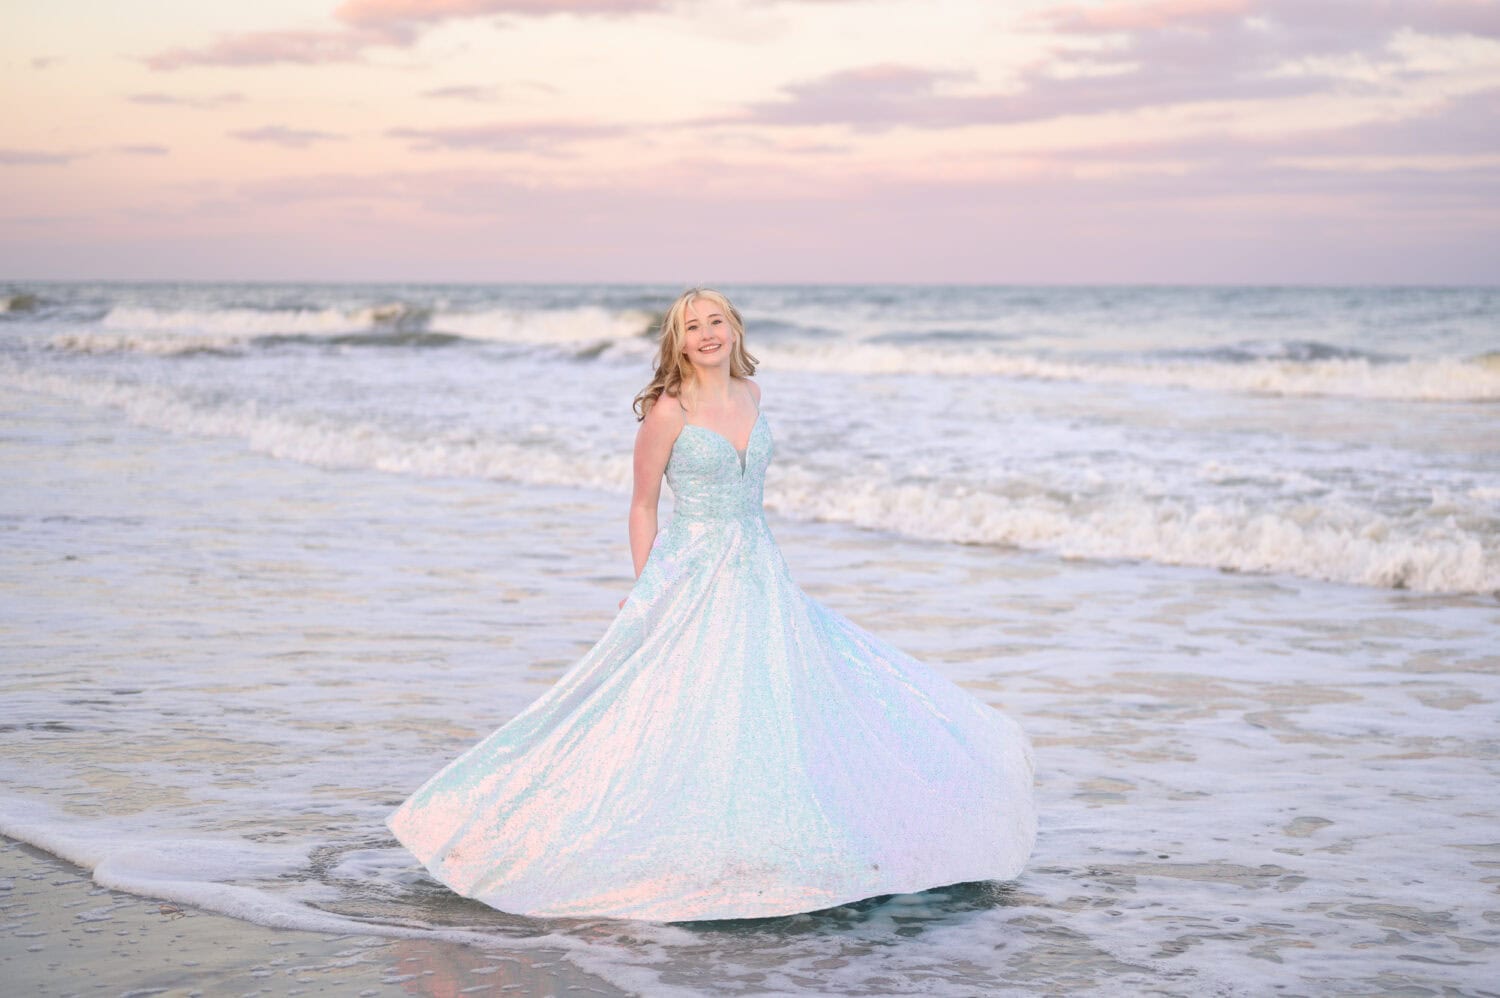 Spinning in her prom dress - Huntington Beach State Park